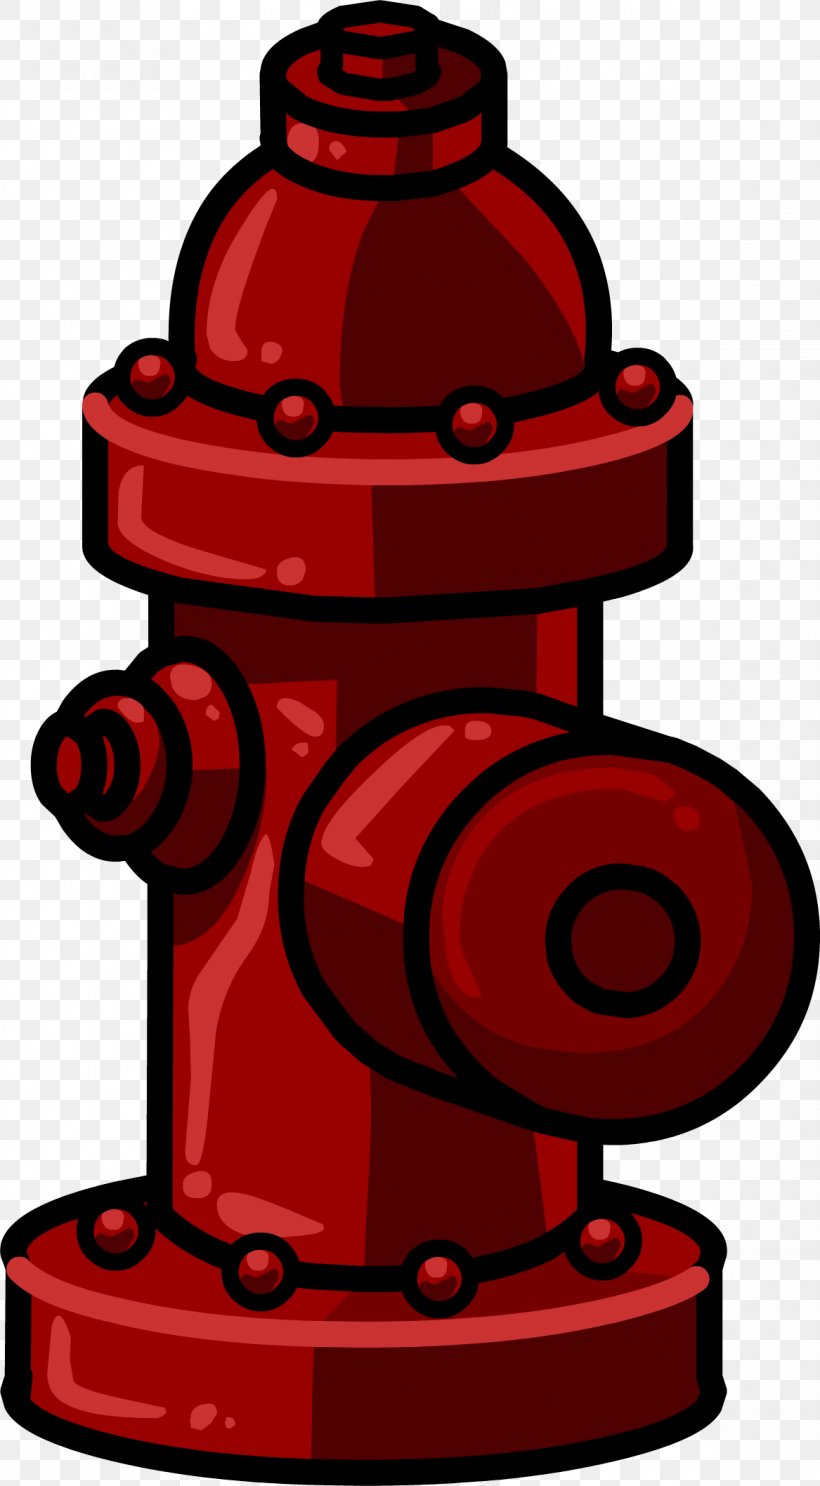 Fire Hydrant Firefighter Club Penguin Entertainment Inc